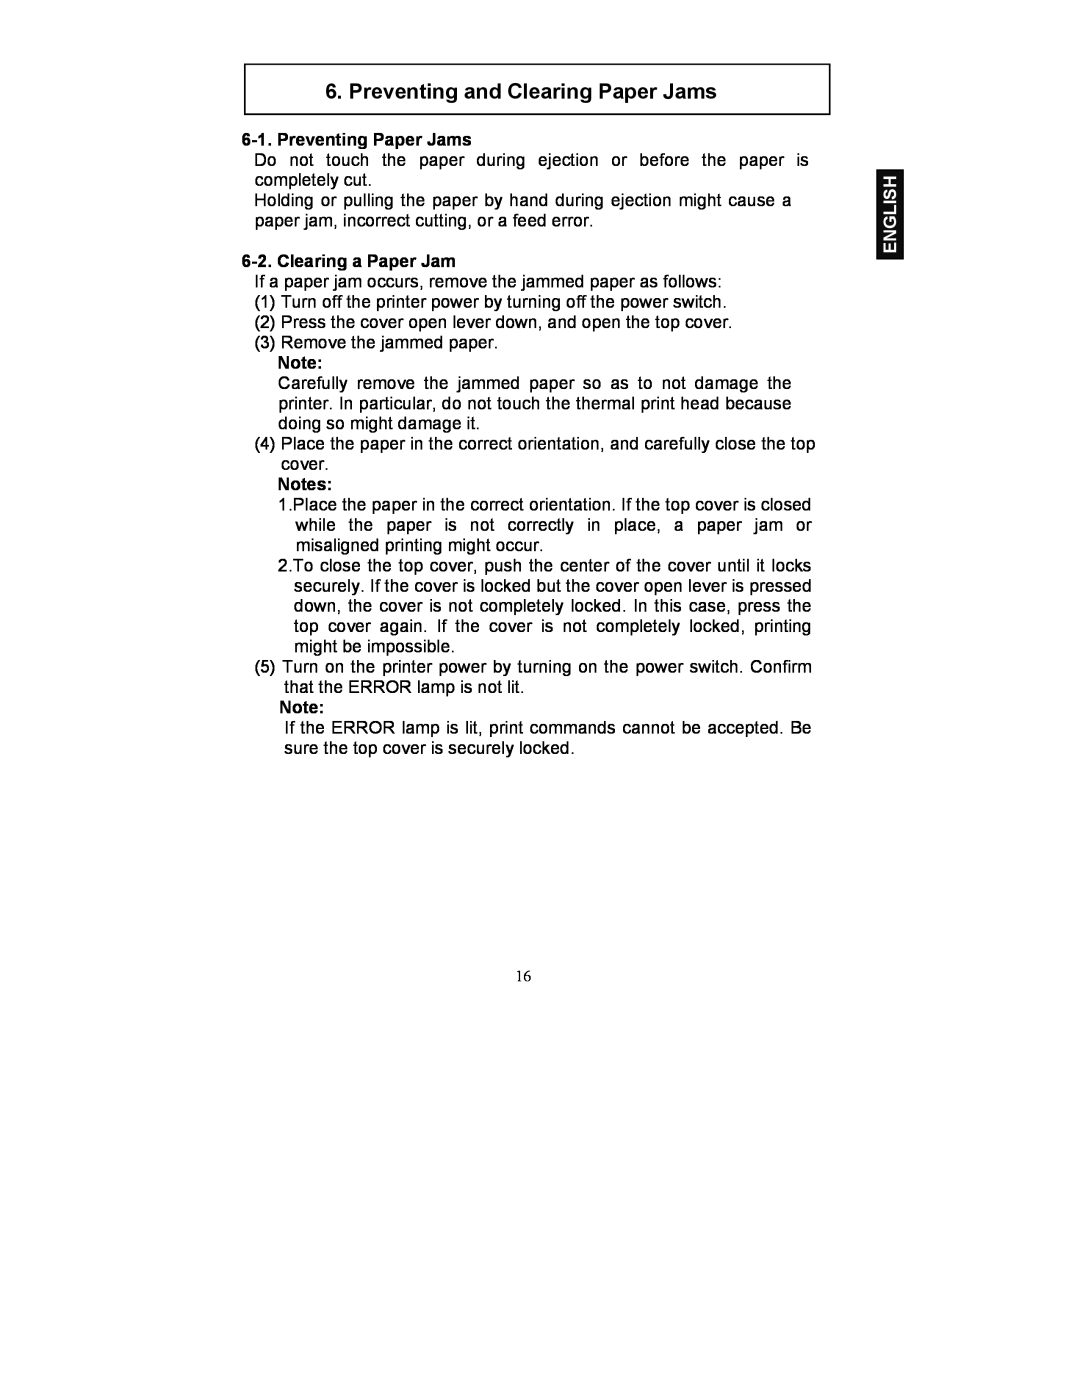 Fujitsu FP-410 user manual Preventing and Clearing Paper Jams, Preventing Paper Jams, Clearing a Paper Jam, English 